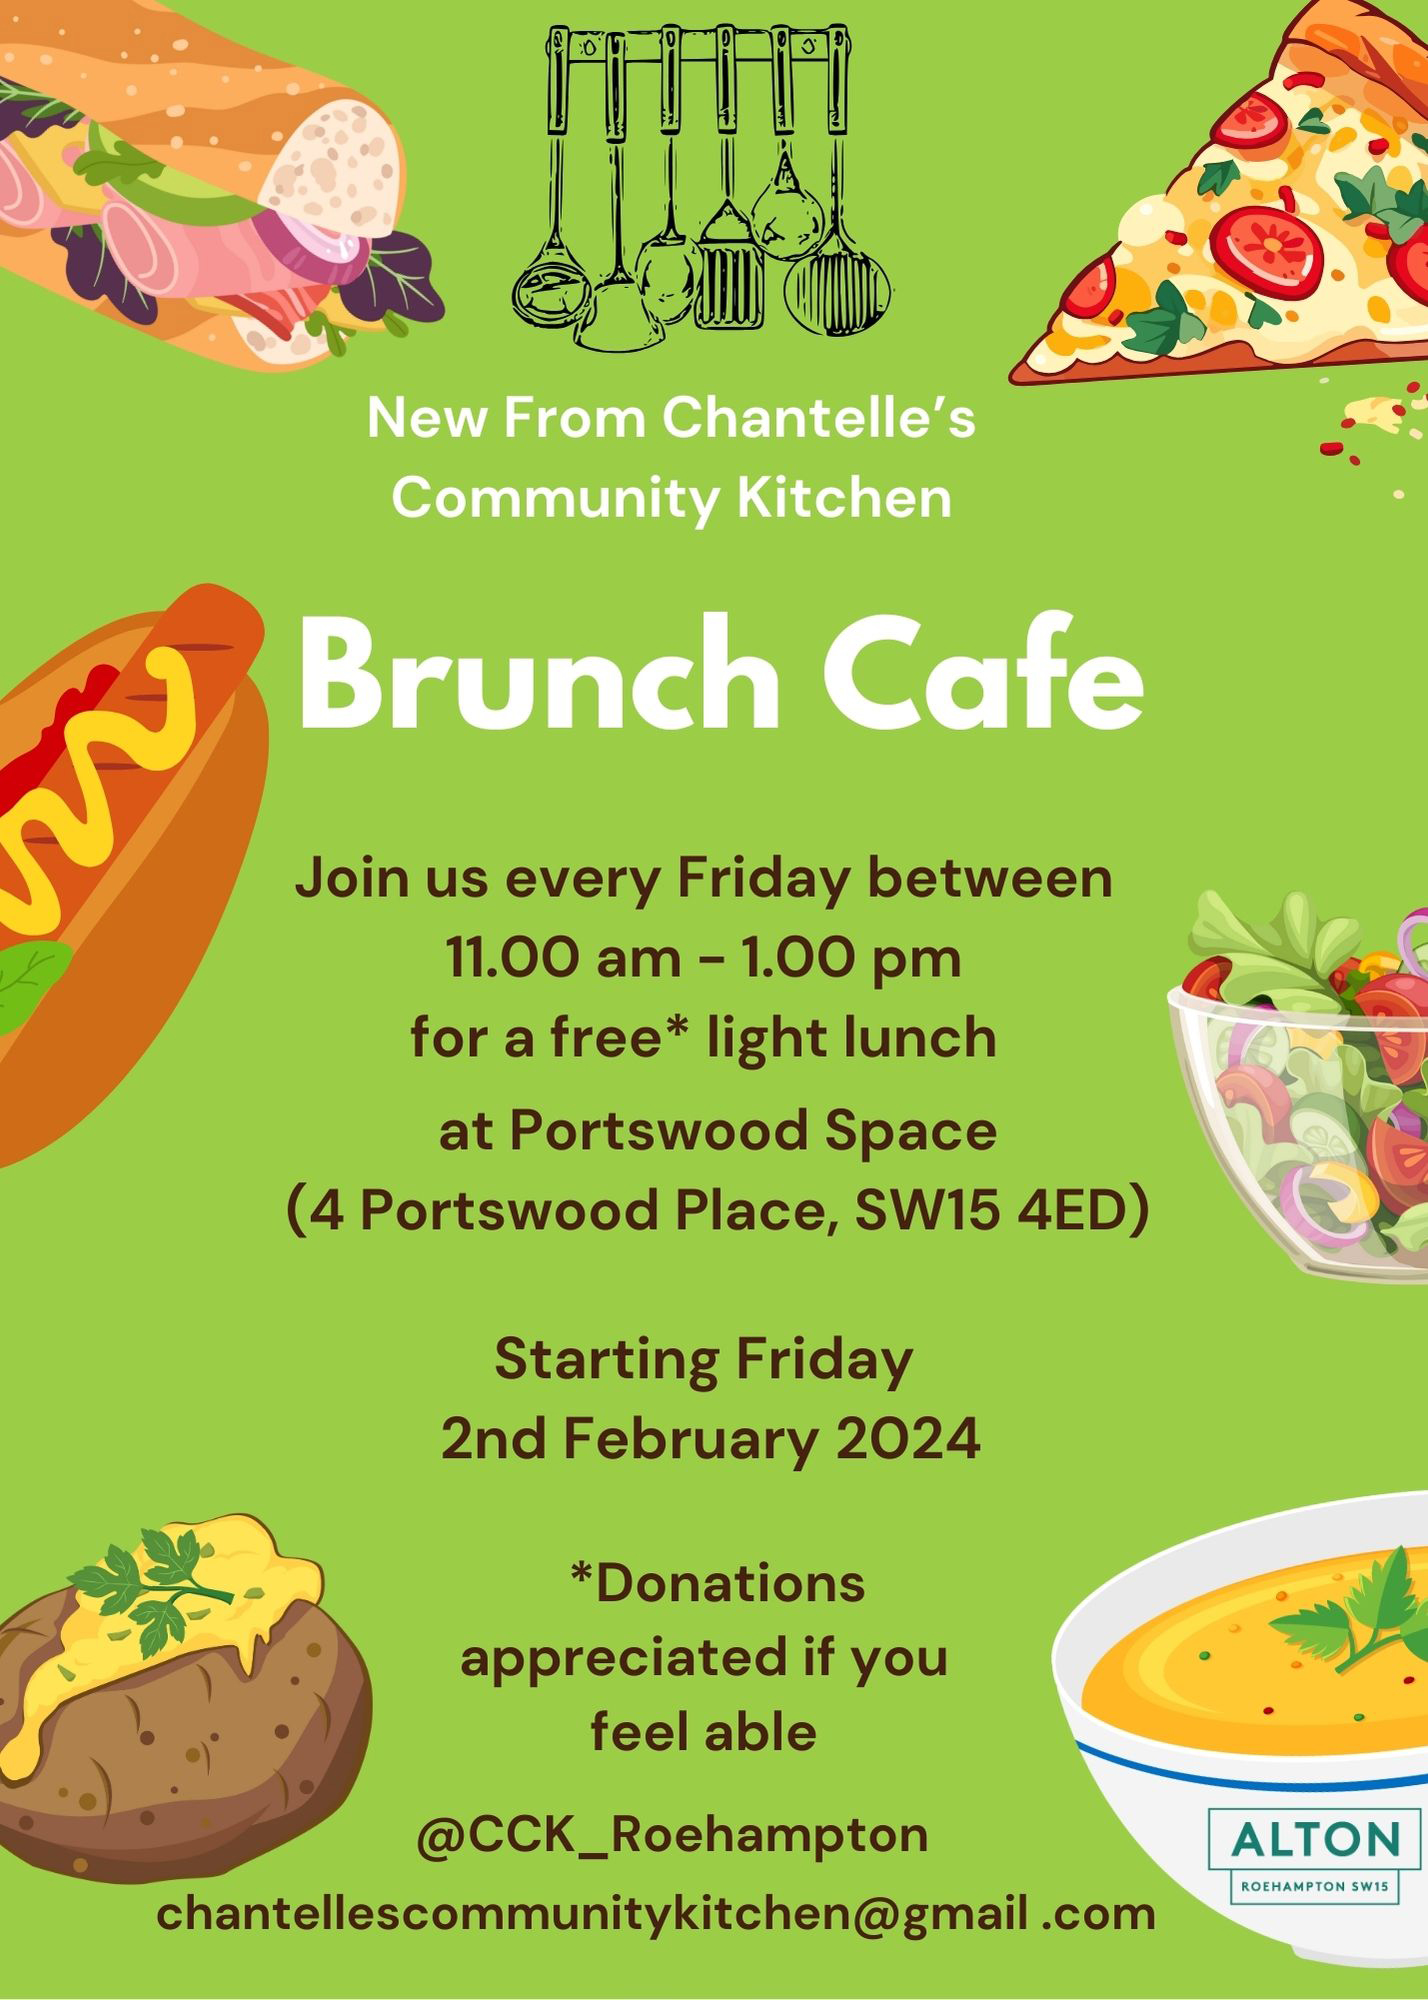 A colourful poster featuring illustrations of different types of food to promote the Brunch Cafe, illustrations include a ham and salad baguette, a slice of pizza, a hot dog, a bowl of salad, a jacket potato and a bowl of soup